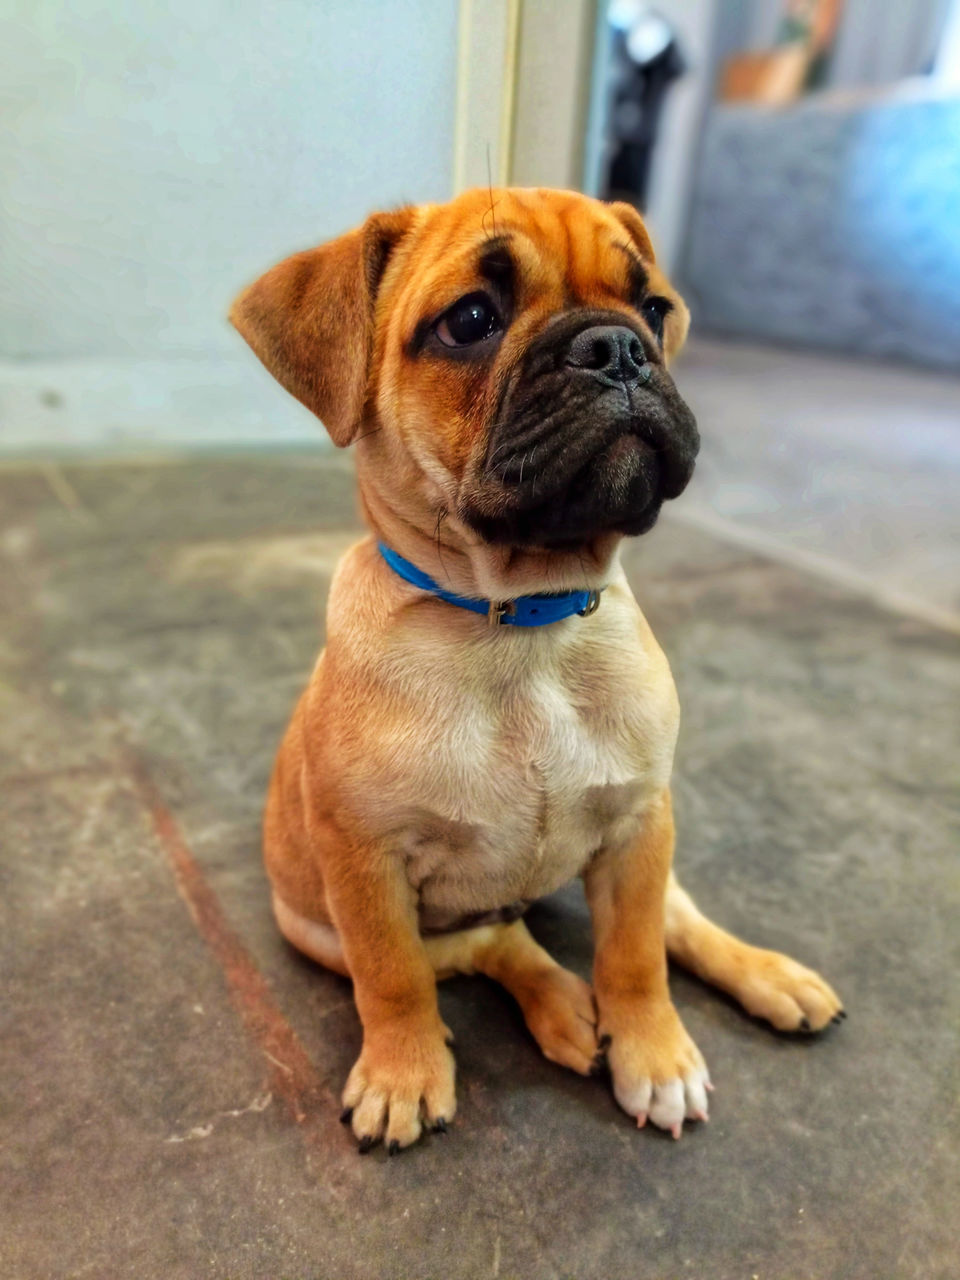 dog, canine, pet, one animal, domestic animals, animal themes, mammal, animal, lap dog, pug, sitting, portrait, looking, puppy, no people, looking away, cute, bullmastiff, full length, focus on foreground, young animal, day, collar